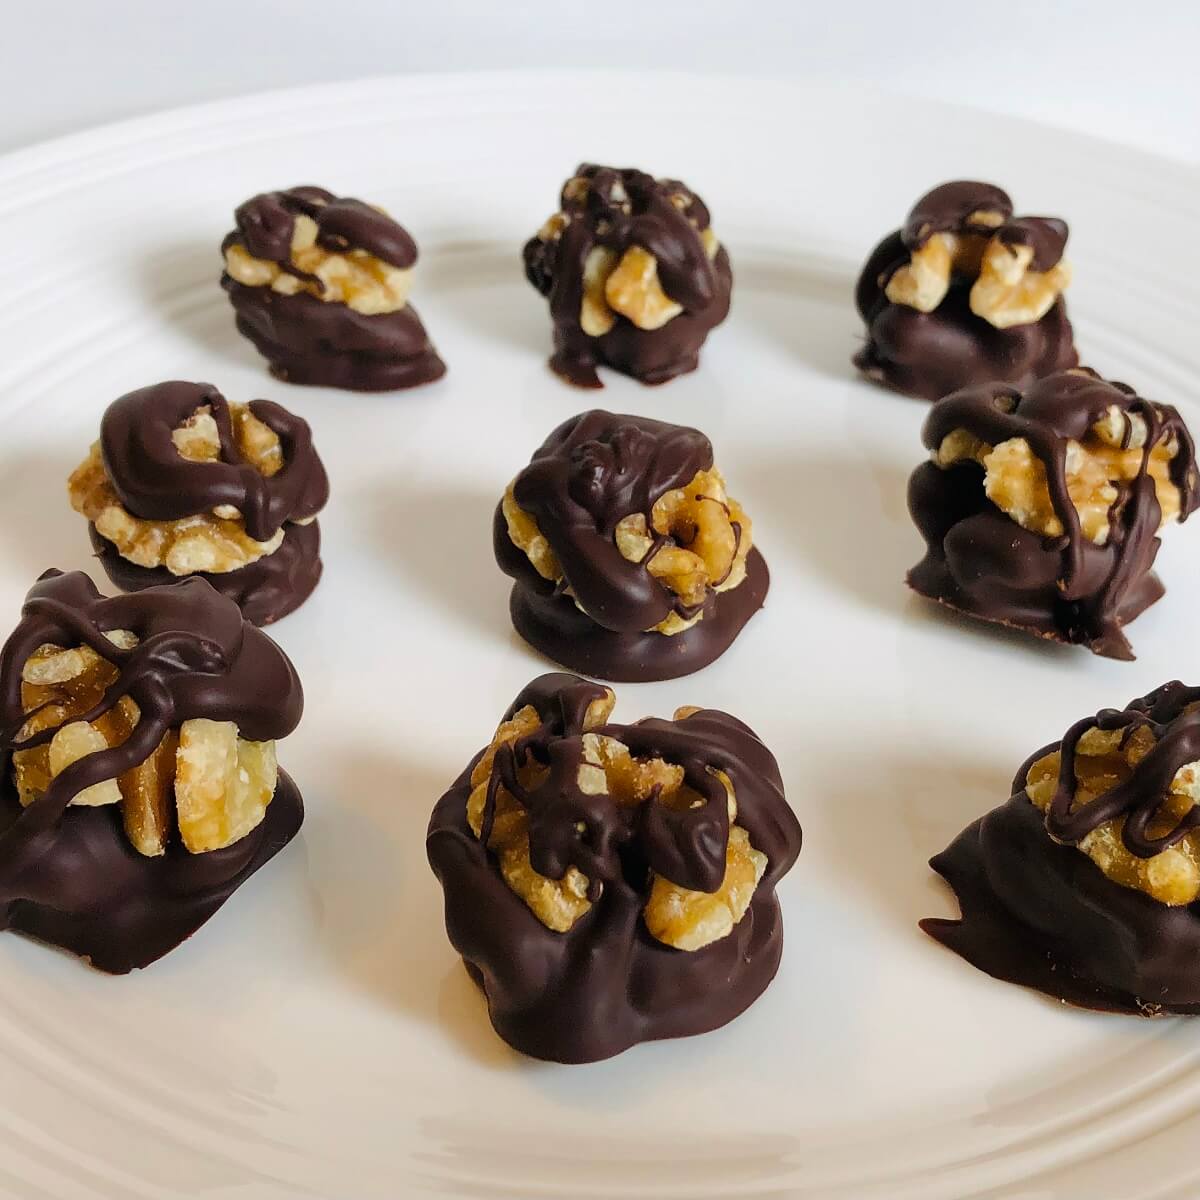 Chocolate covered nuts on a white plate.